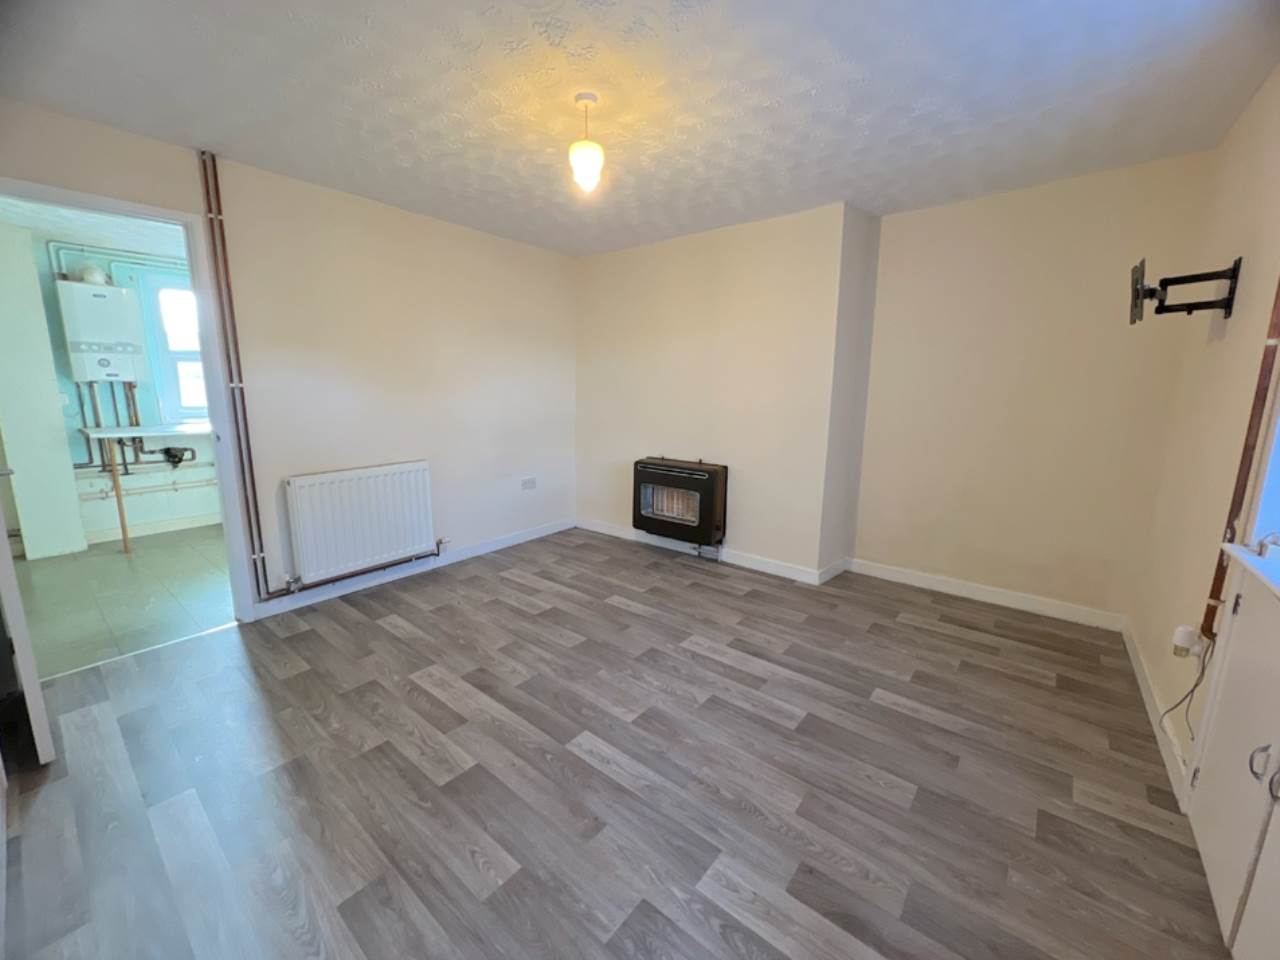 2 bed house for sale in Crynfryn Row, Aberystwyth  - Property Image 3